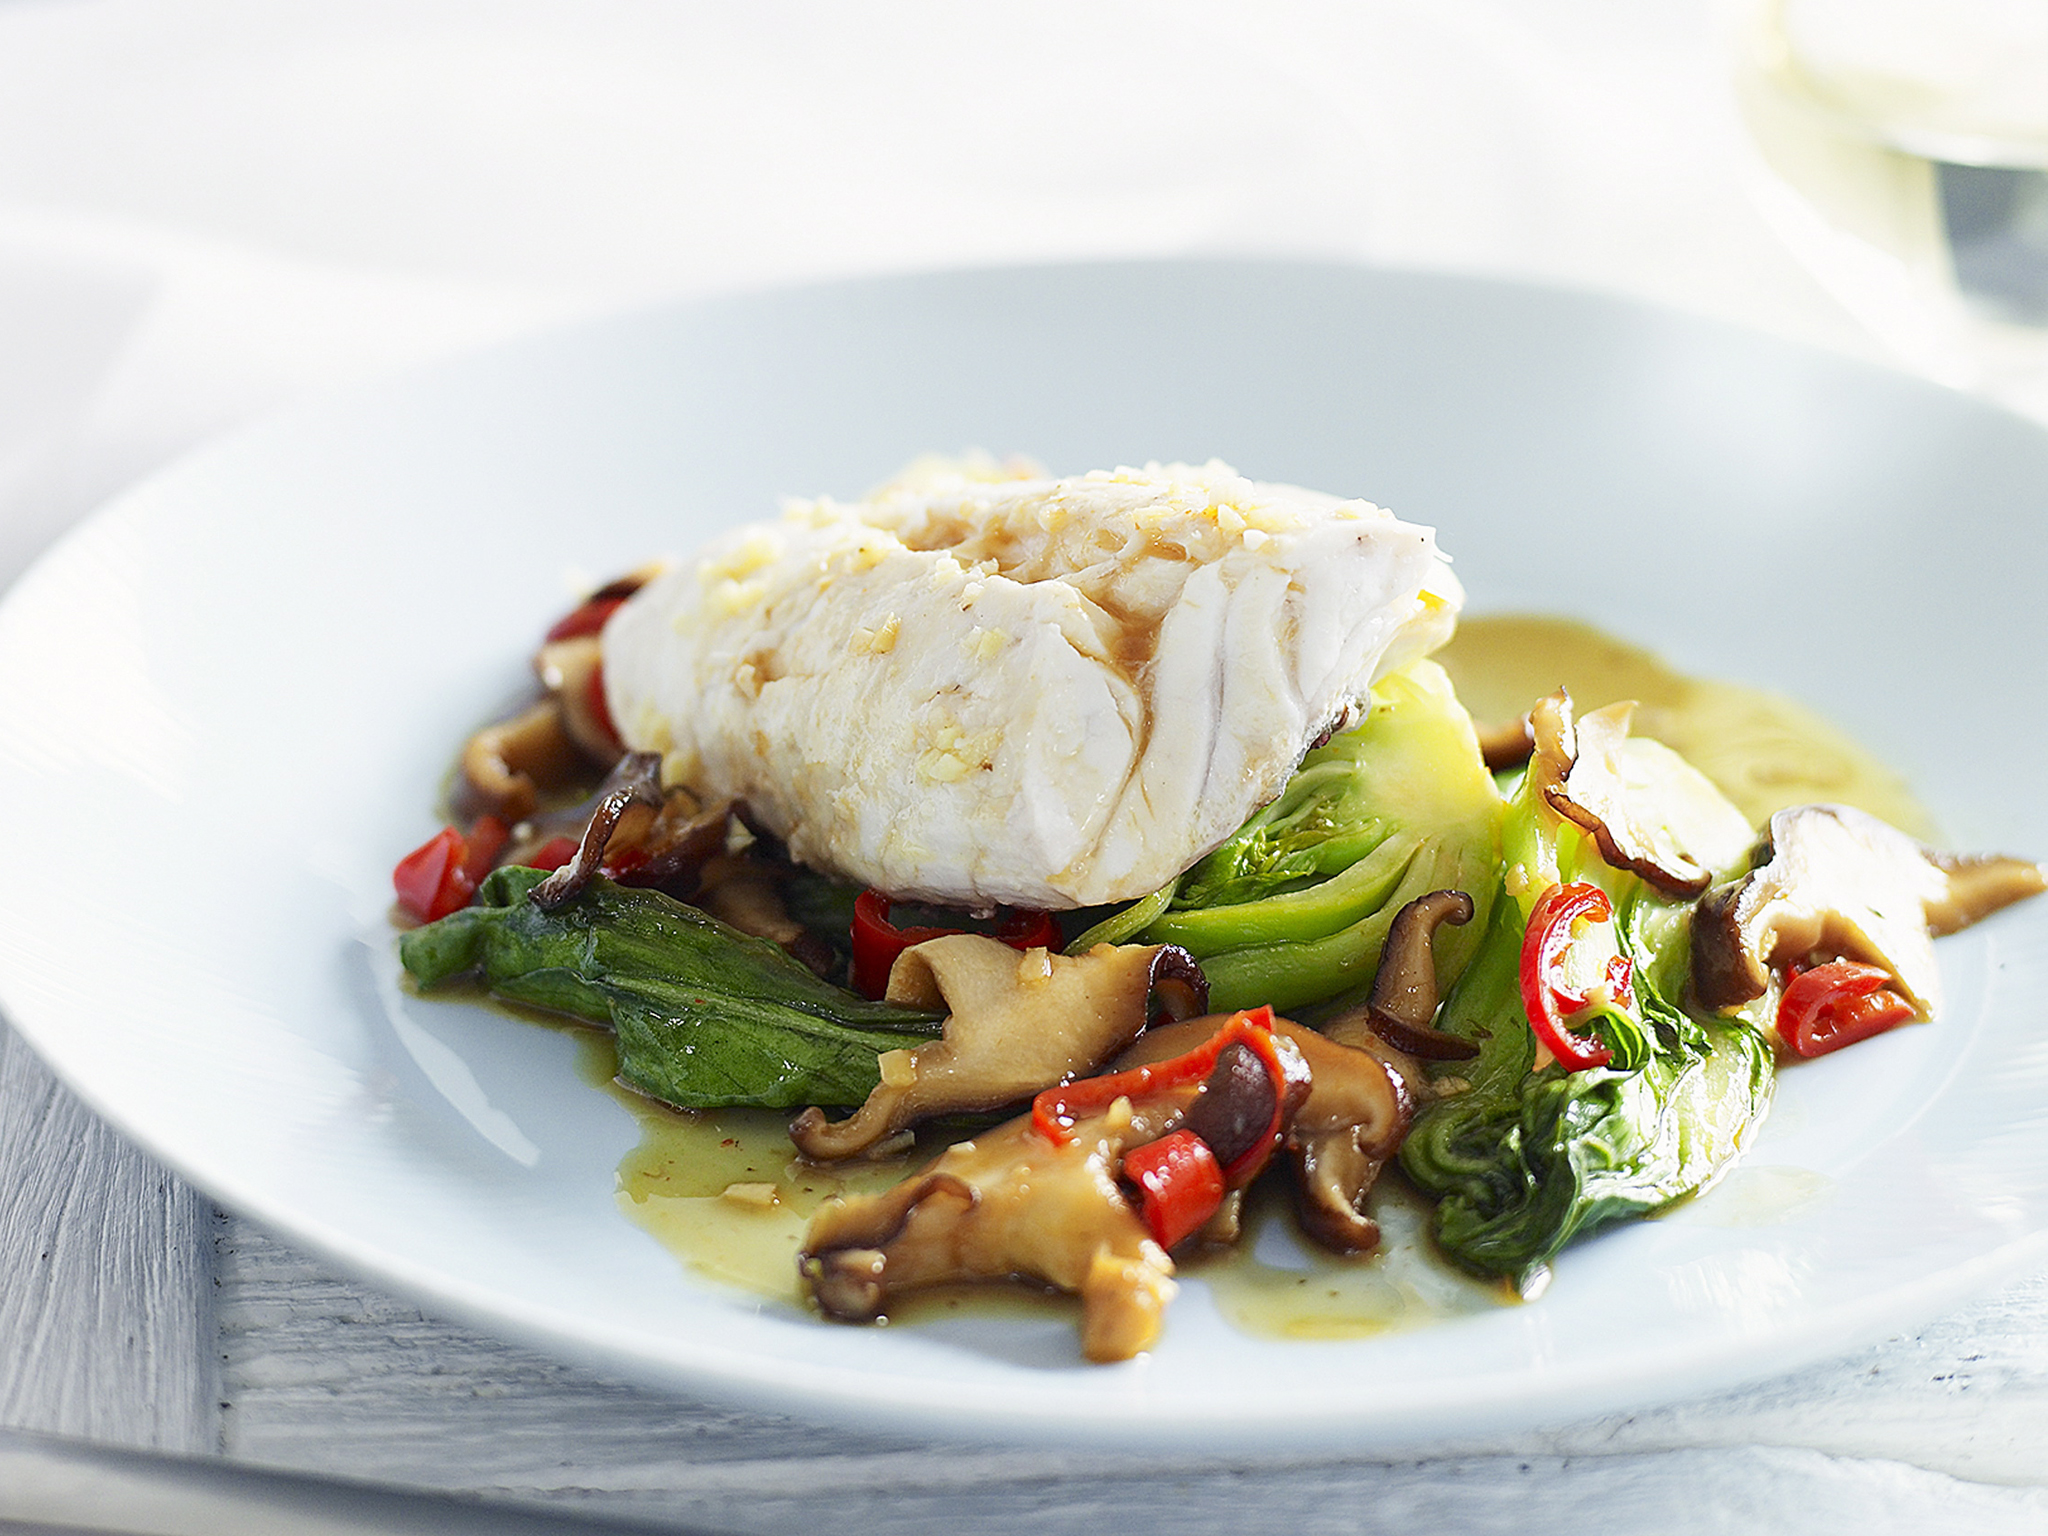 Steamed fish with bok choy and mushrooms